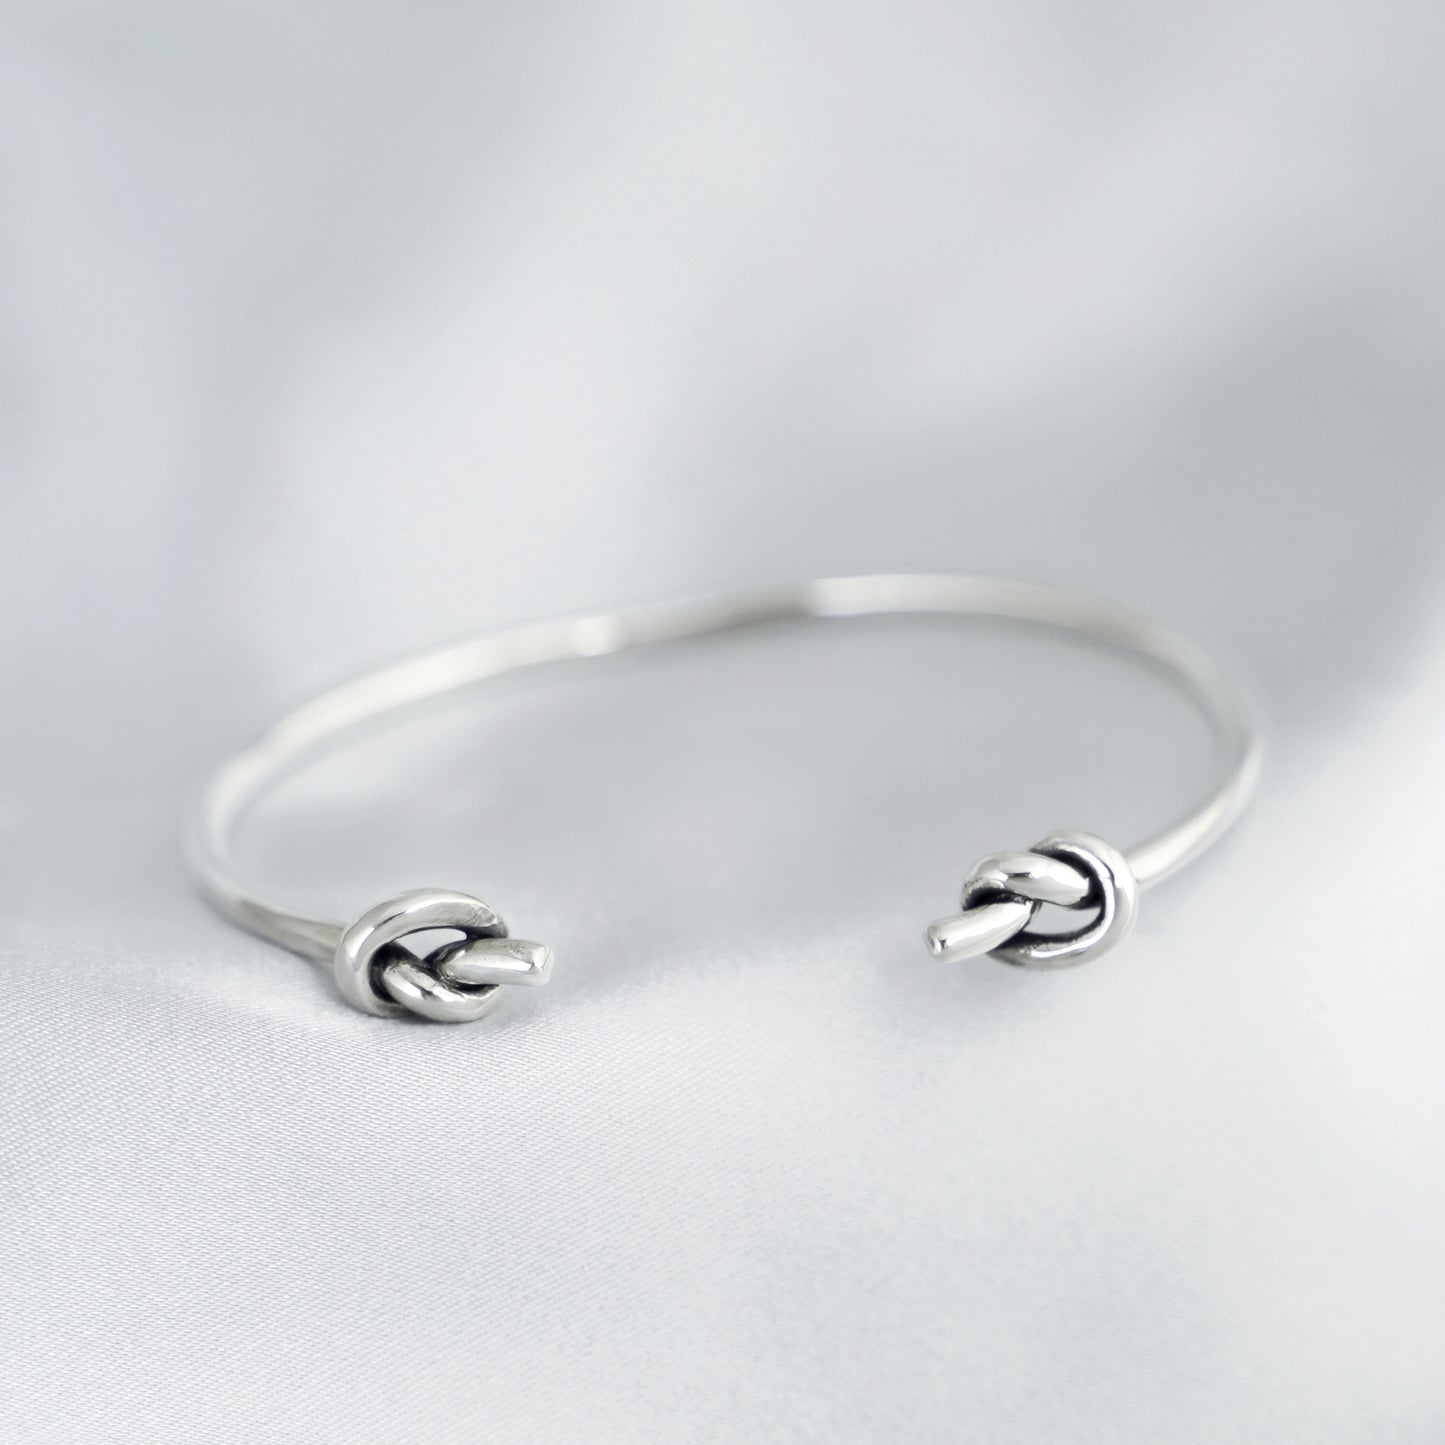 925 Sterling Silver Friendship Knot Bangle with Double Twisted Knots and Heart Design - sugarkittenlondon